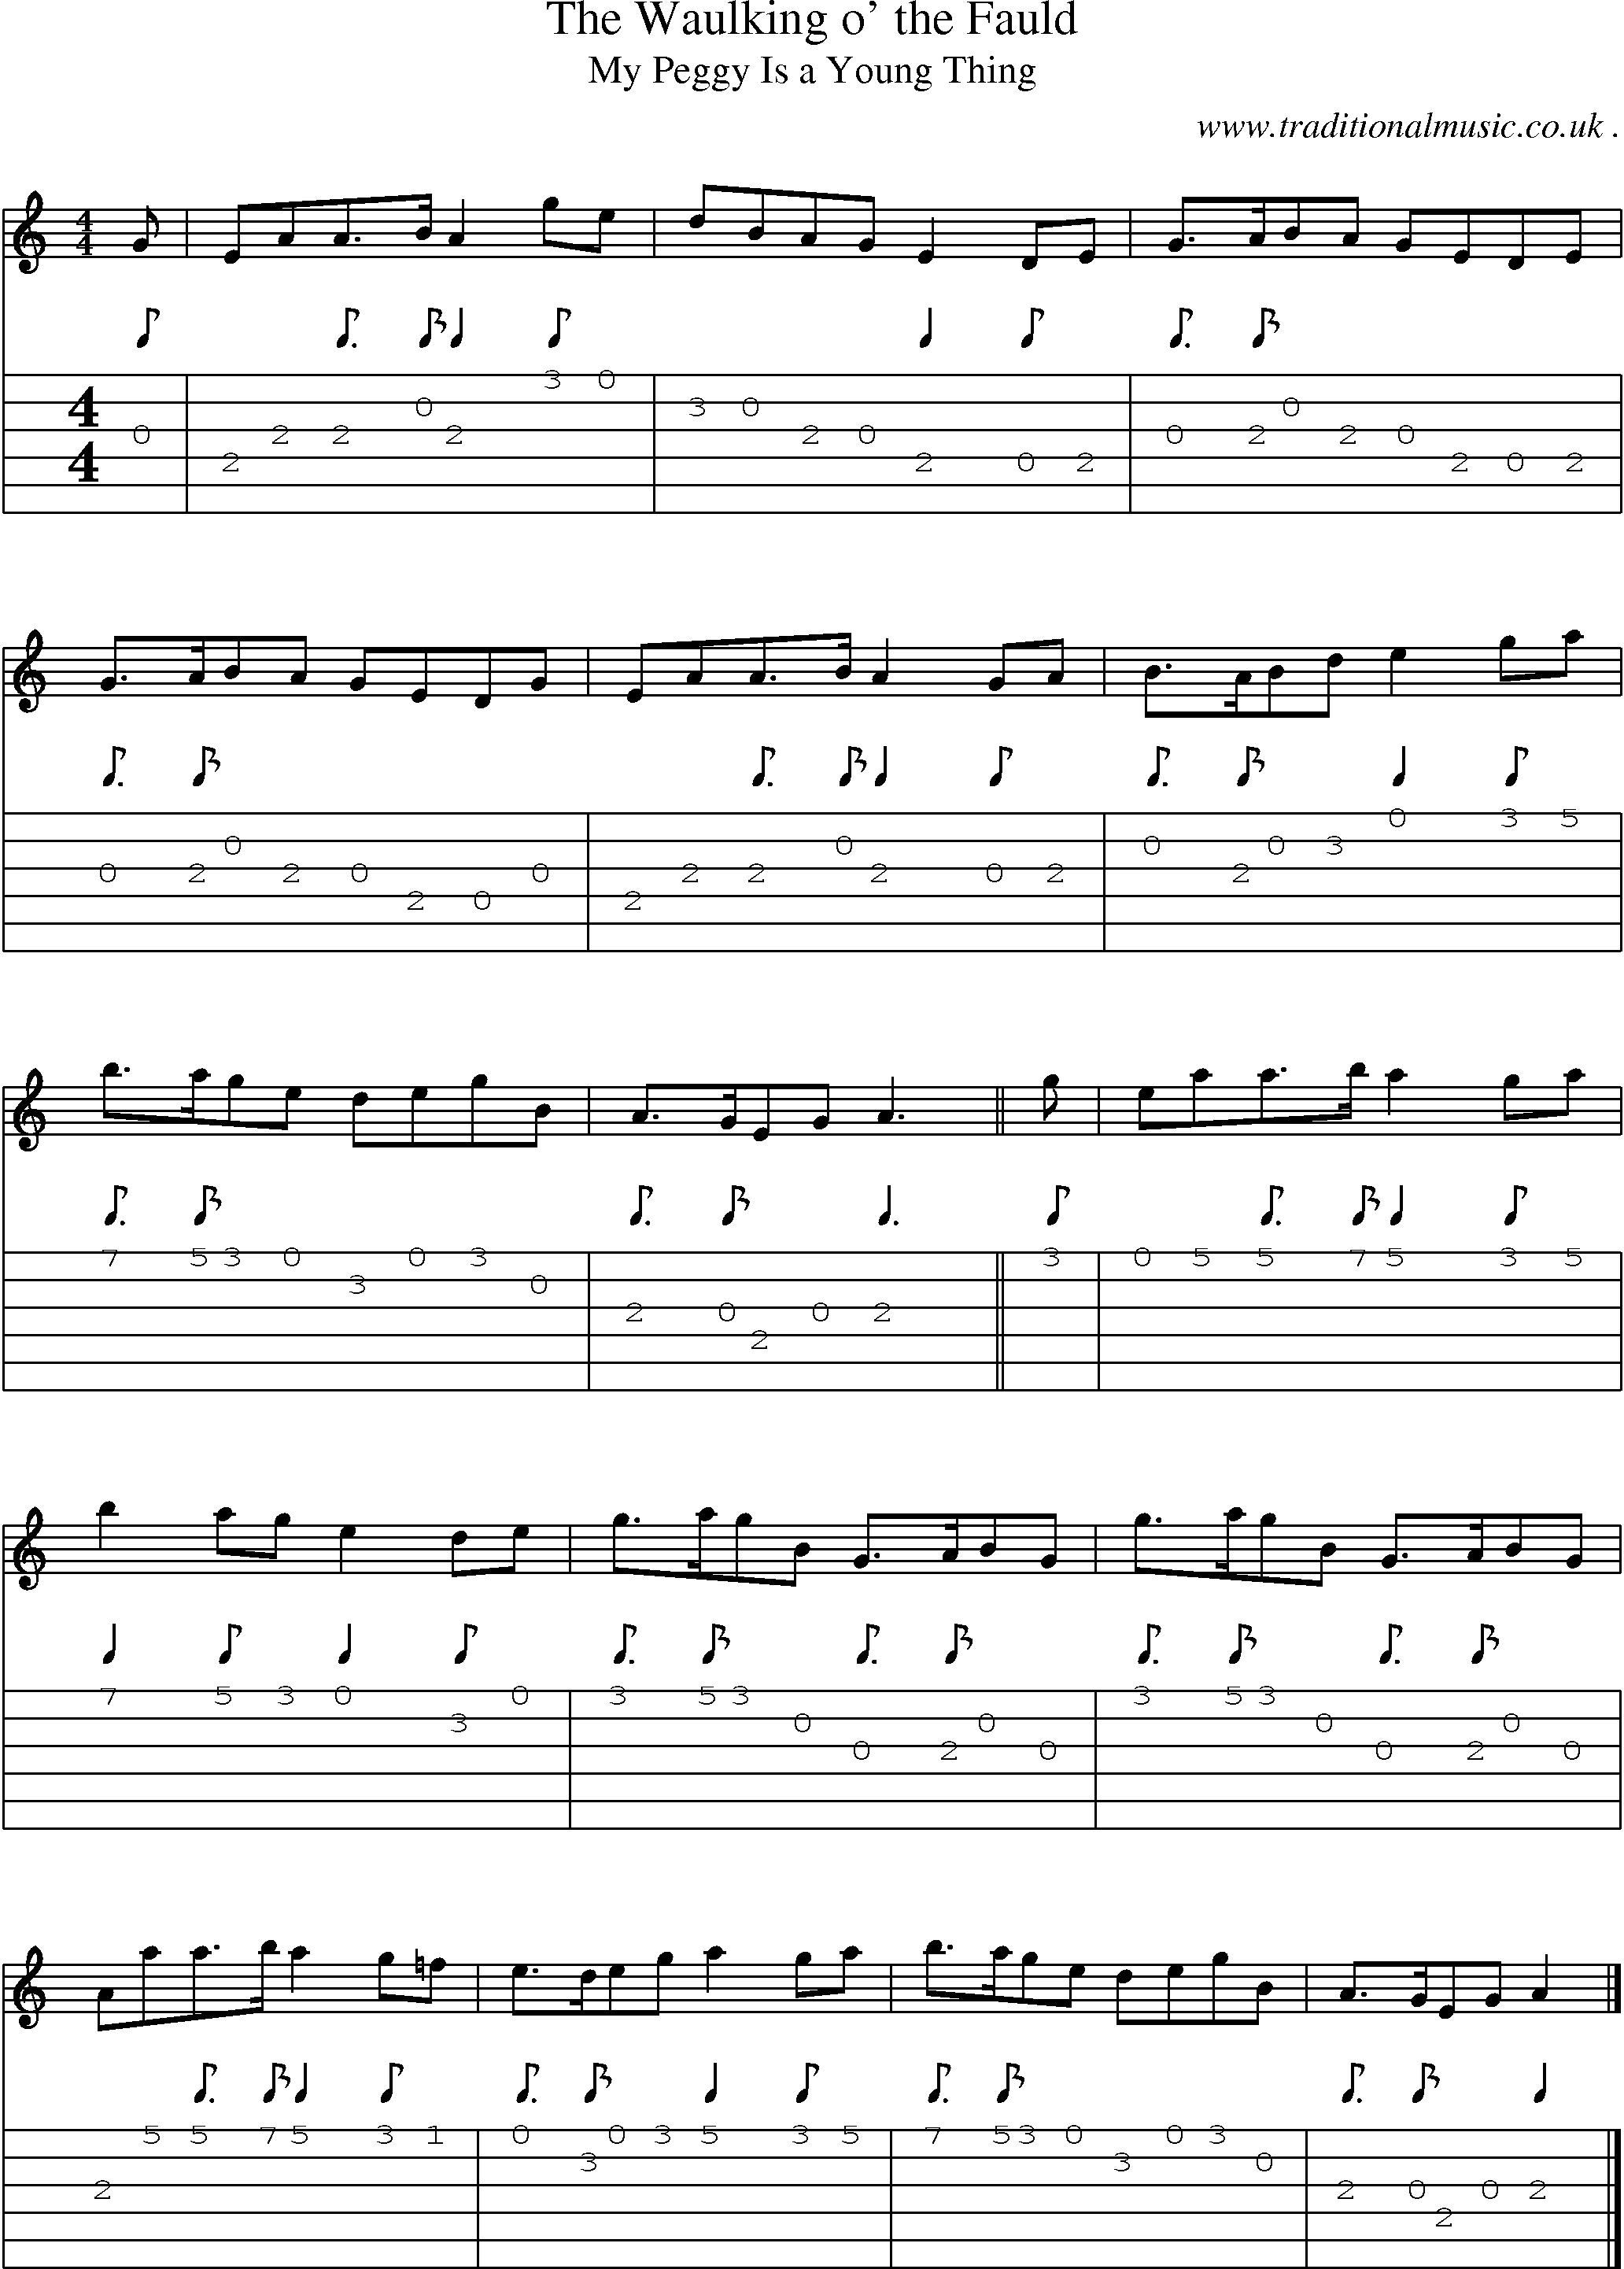 Sheet-music  score, Chords and Guitar Tabs for The Waulking O The Fauld